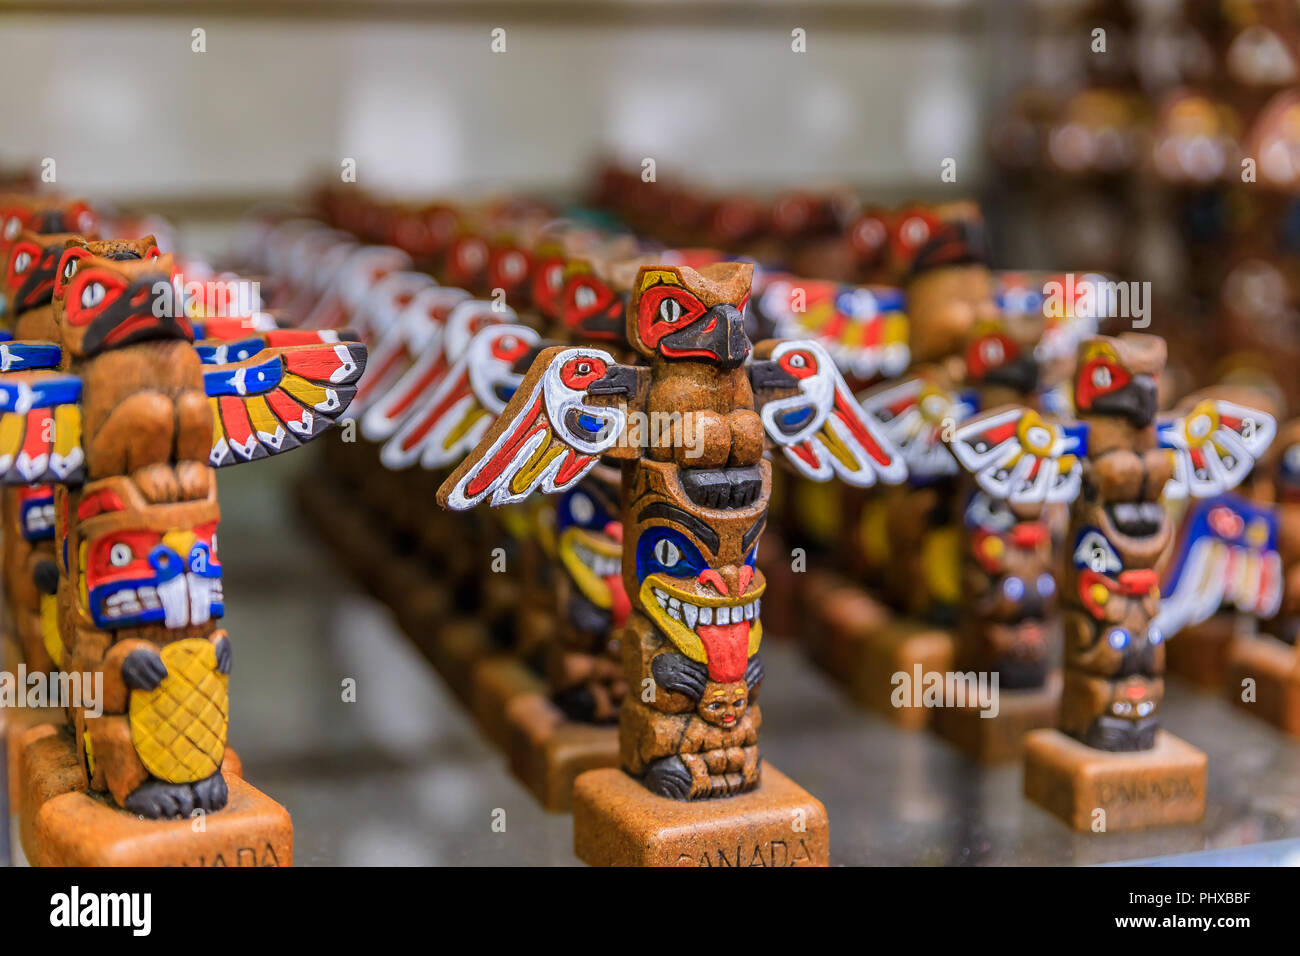 Carved wooden miniature First Nations or Native American Indian totem pole souvenirs at a tourist shop in Vancouver Canada Stock Photo